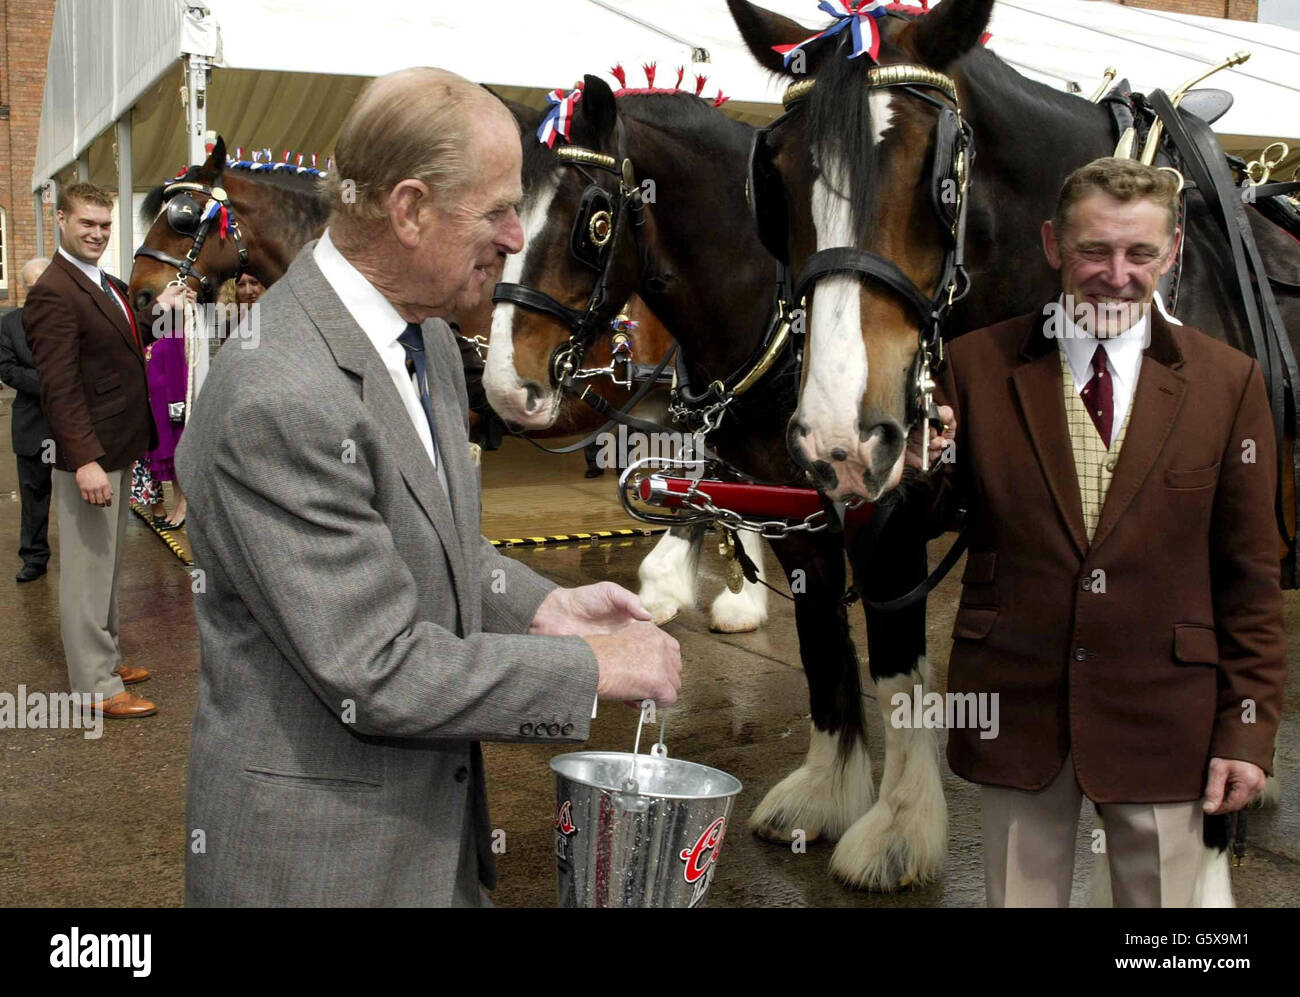 The Duke of Edinburgh gives a shire horse a bucket of ale at the Bass Museum in Burton upon Trent, Staffordshire where he visited with Britain's Queen Elizabeth II as part of her Golden Jubilee tour of Britain. Stock Photo